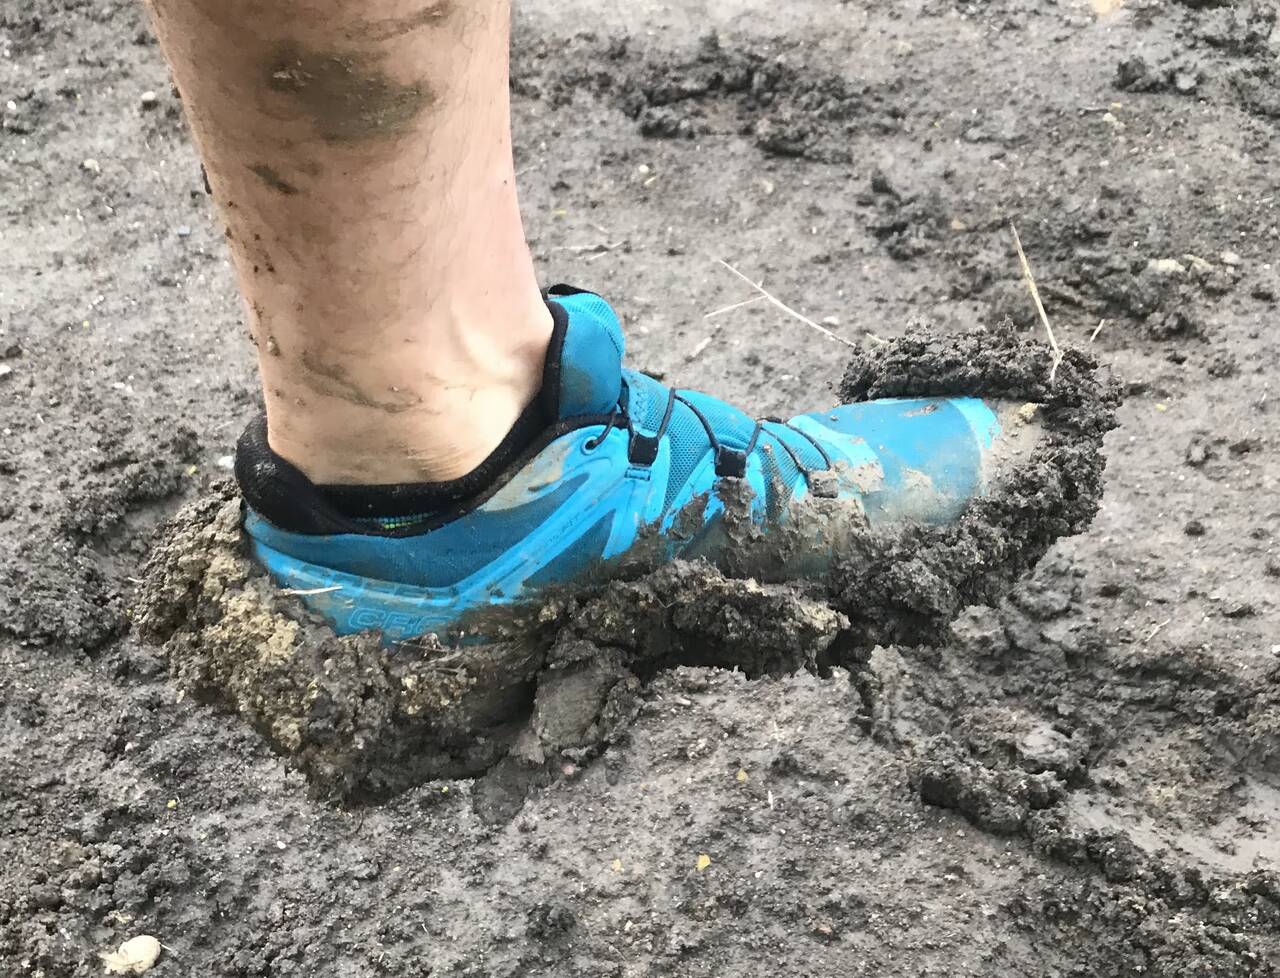 Mud-caked shoes